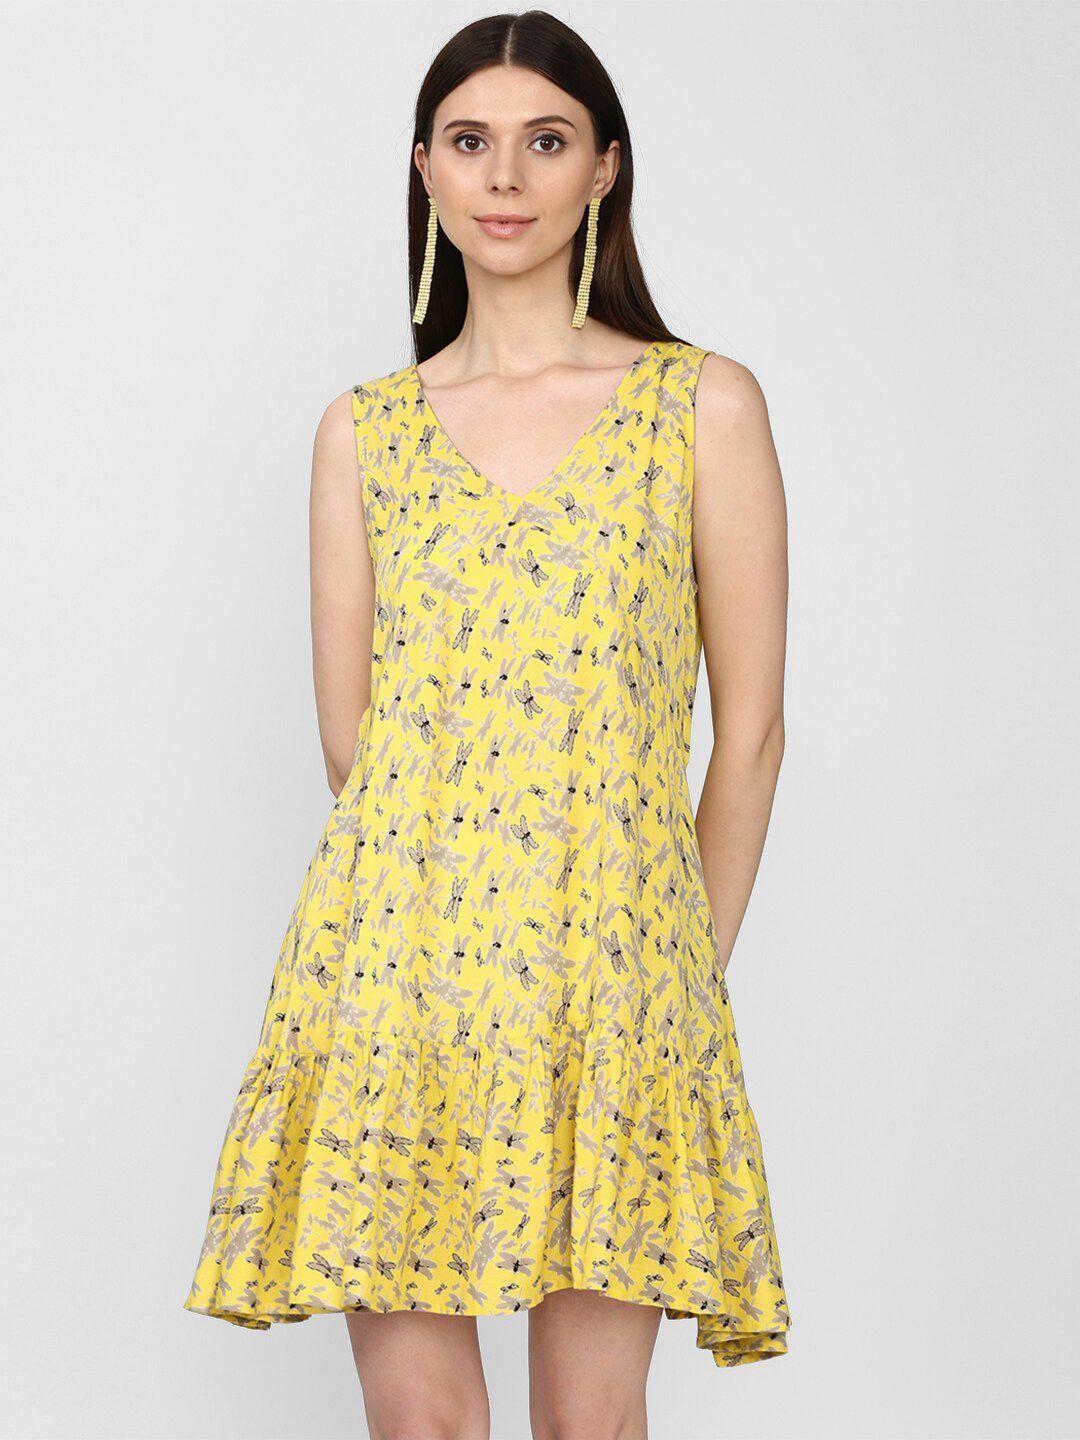 forever-21-yellow-floral-dress